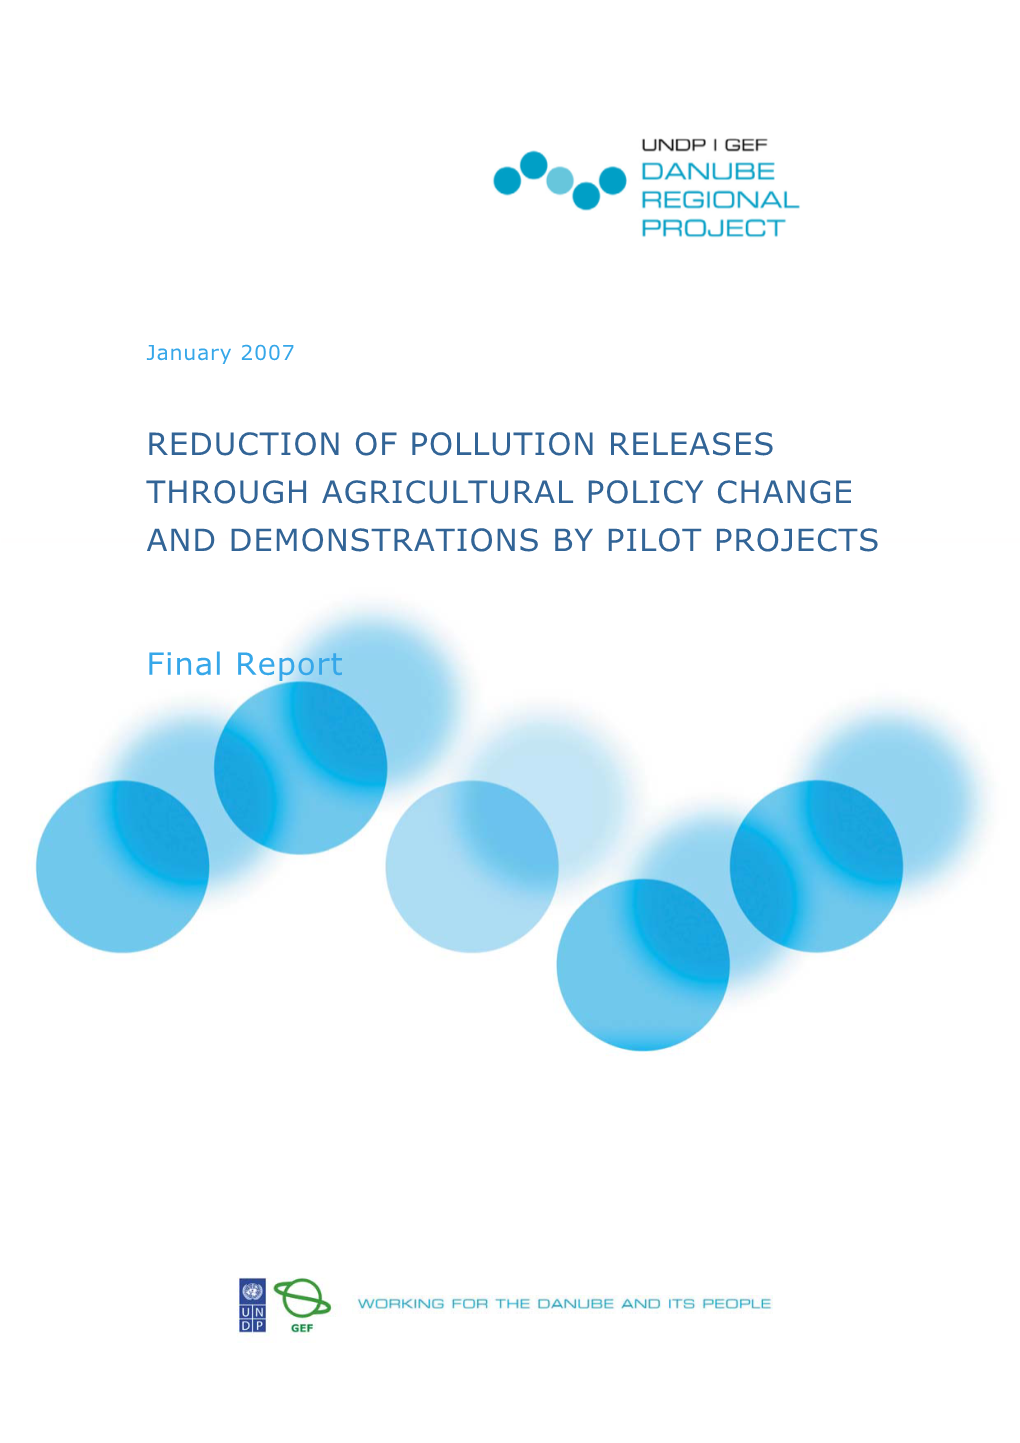 REDUCTION of POLLUTION RELEASES THROUGH AGRICULTURAL POLICY CHANGE and DEMONSTRATIONS by PILOT PROJECTS Final Report